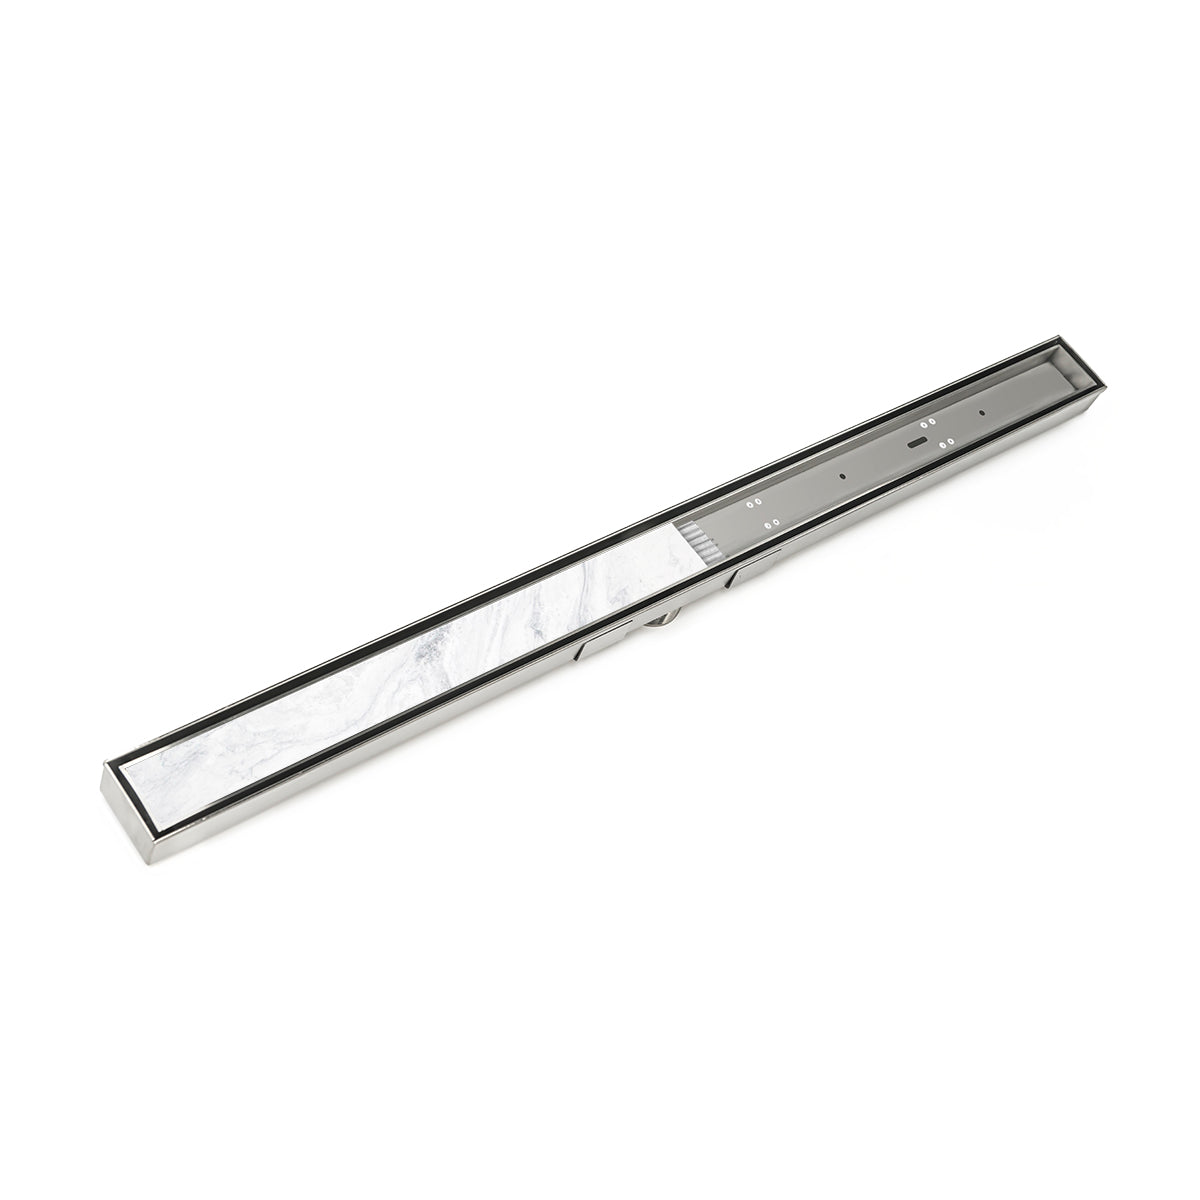 Infinity Drain 60" S-Stainless Steel Series High Flow Site Sizable Linear Drain Kit with Low Profile Tile Insert Frame with Cast Iron Drain Body, 3" No Hub Outlet